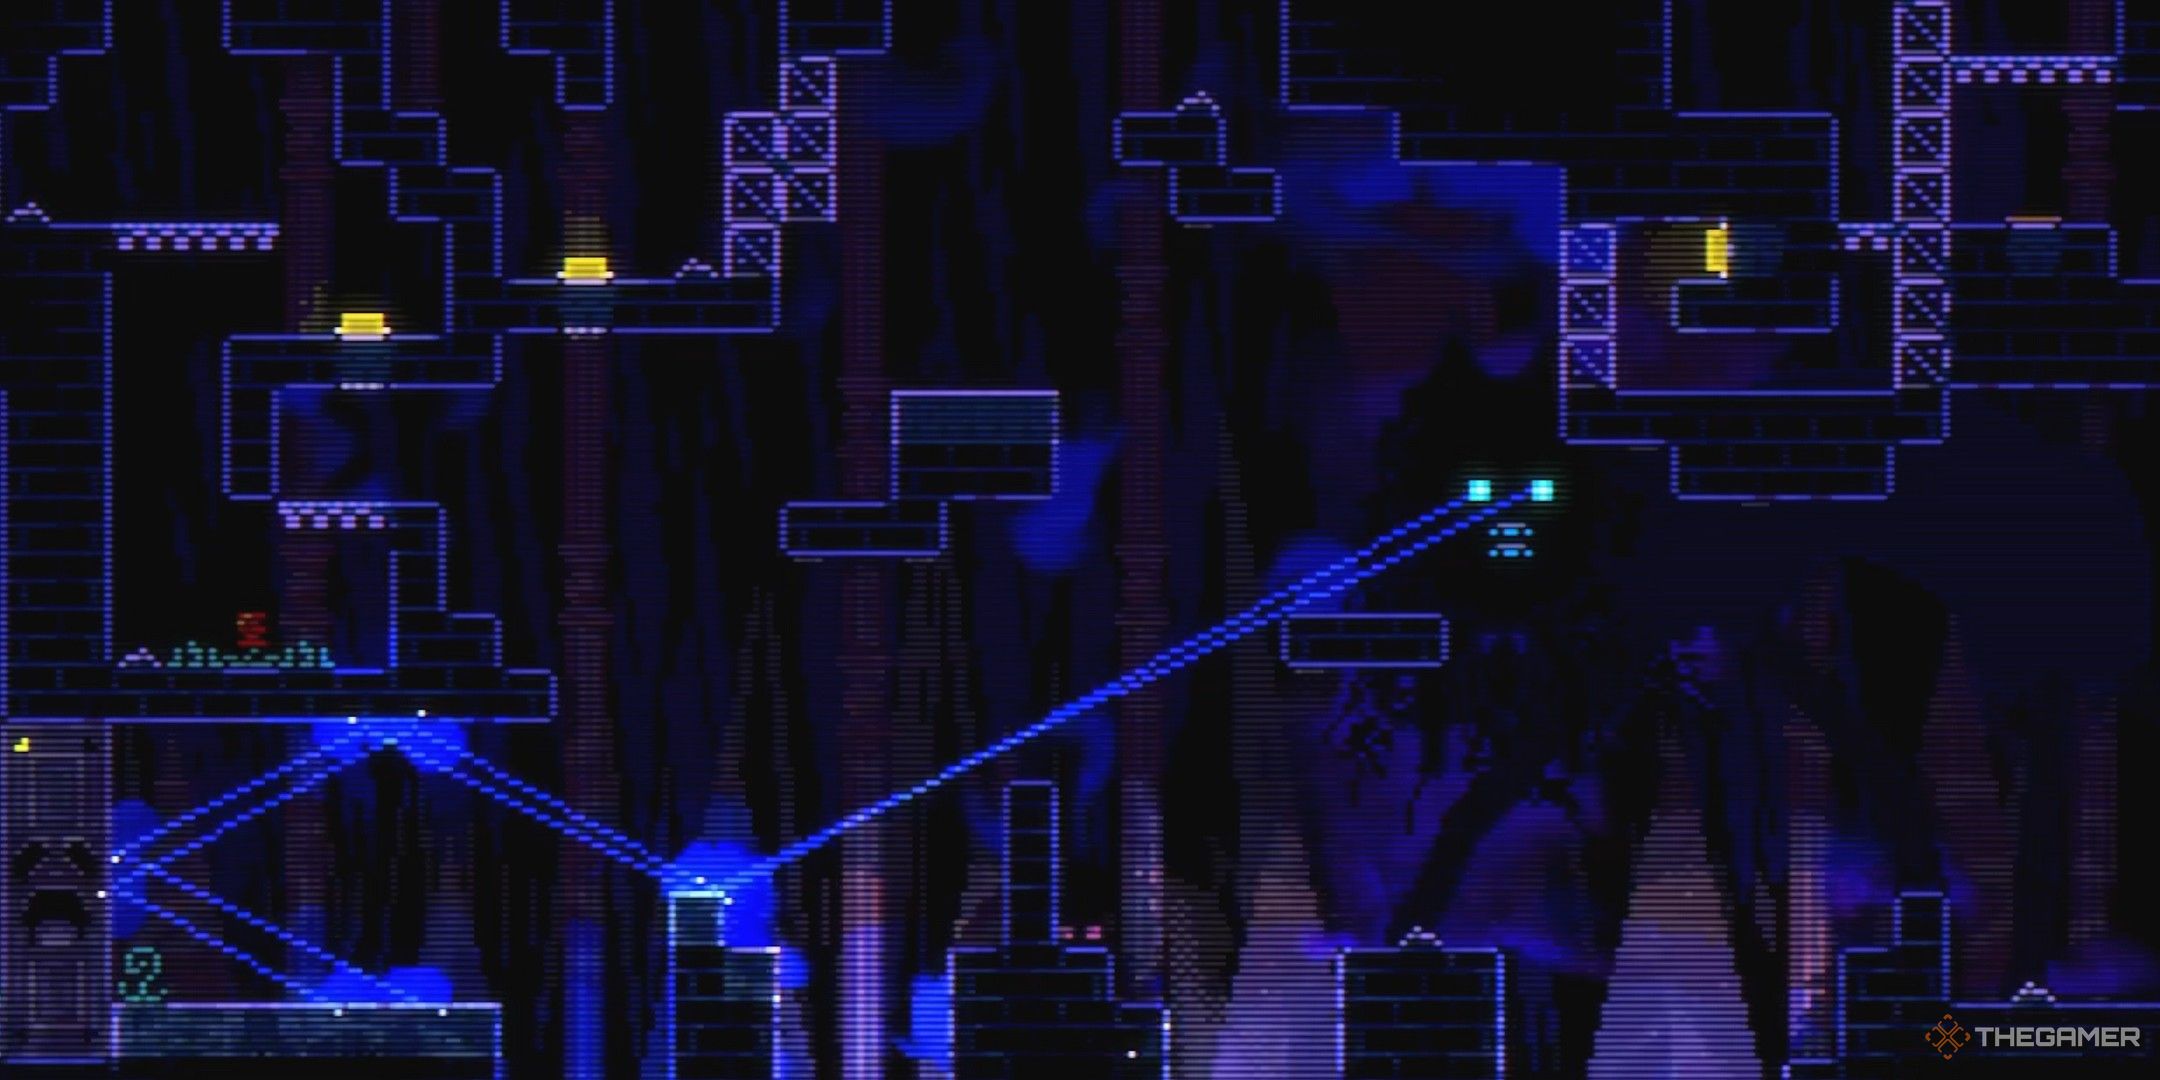 the manticore shooting a laser during the final puzzle animal well